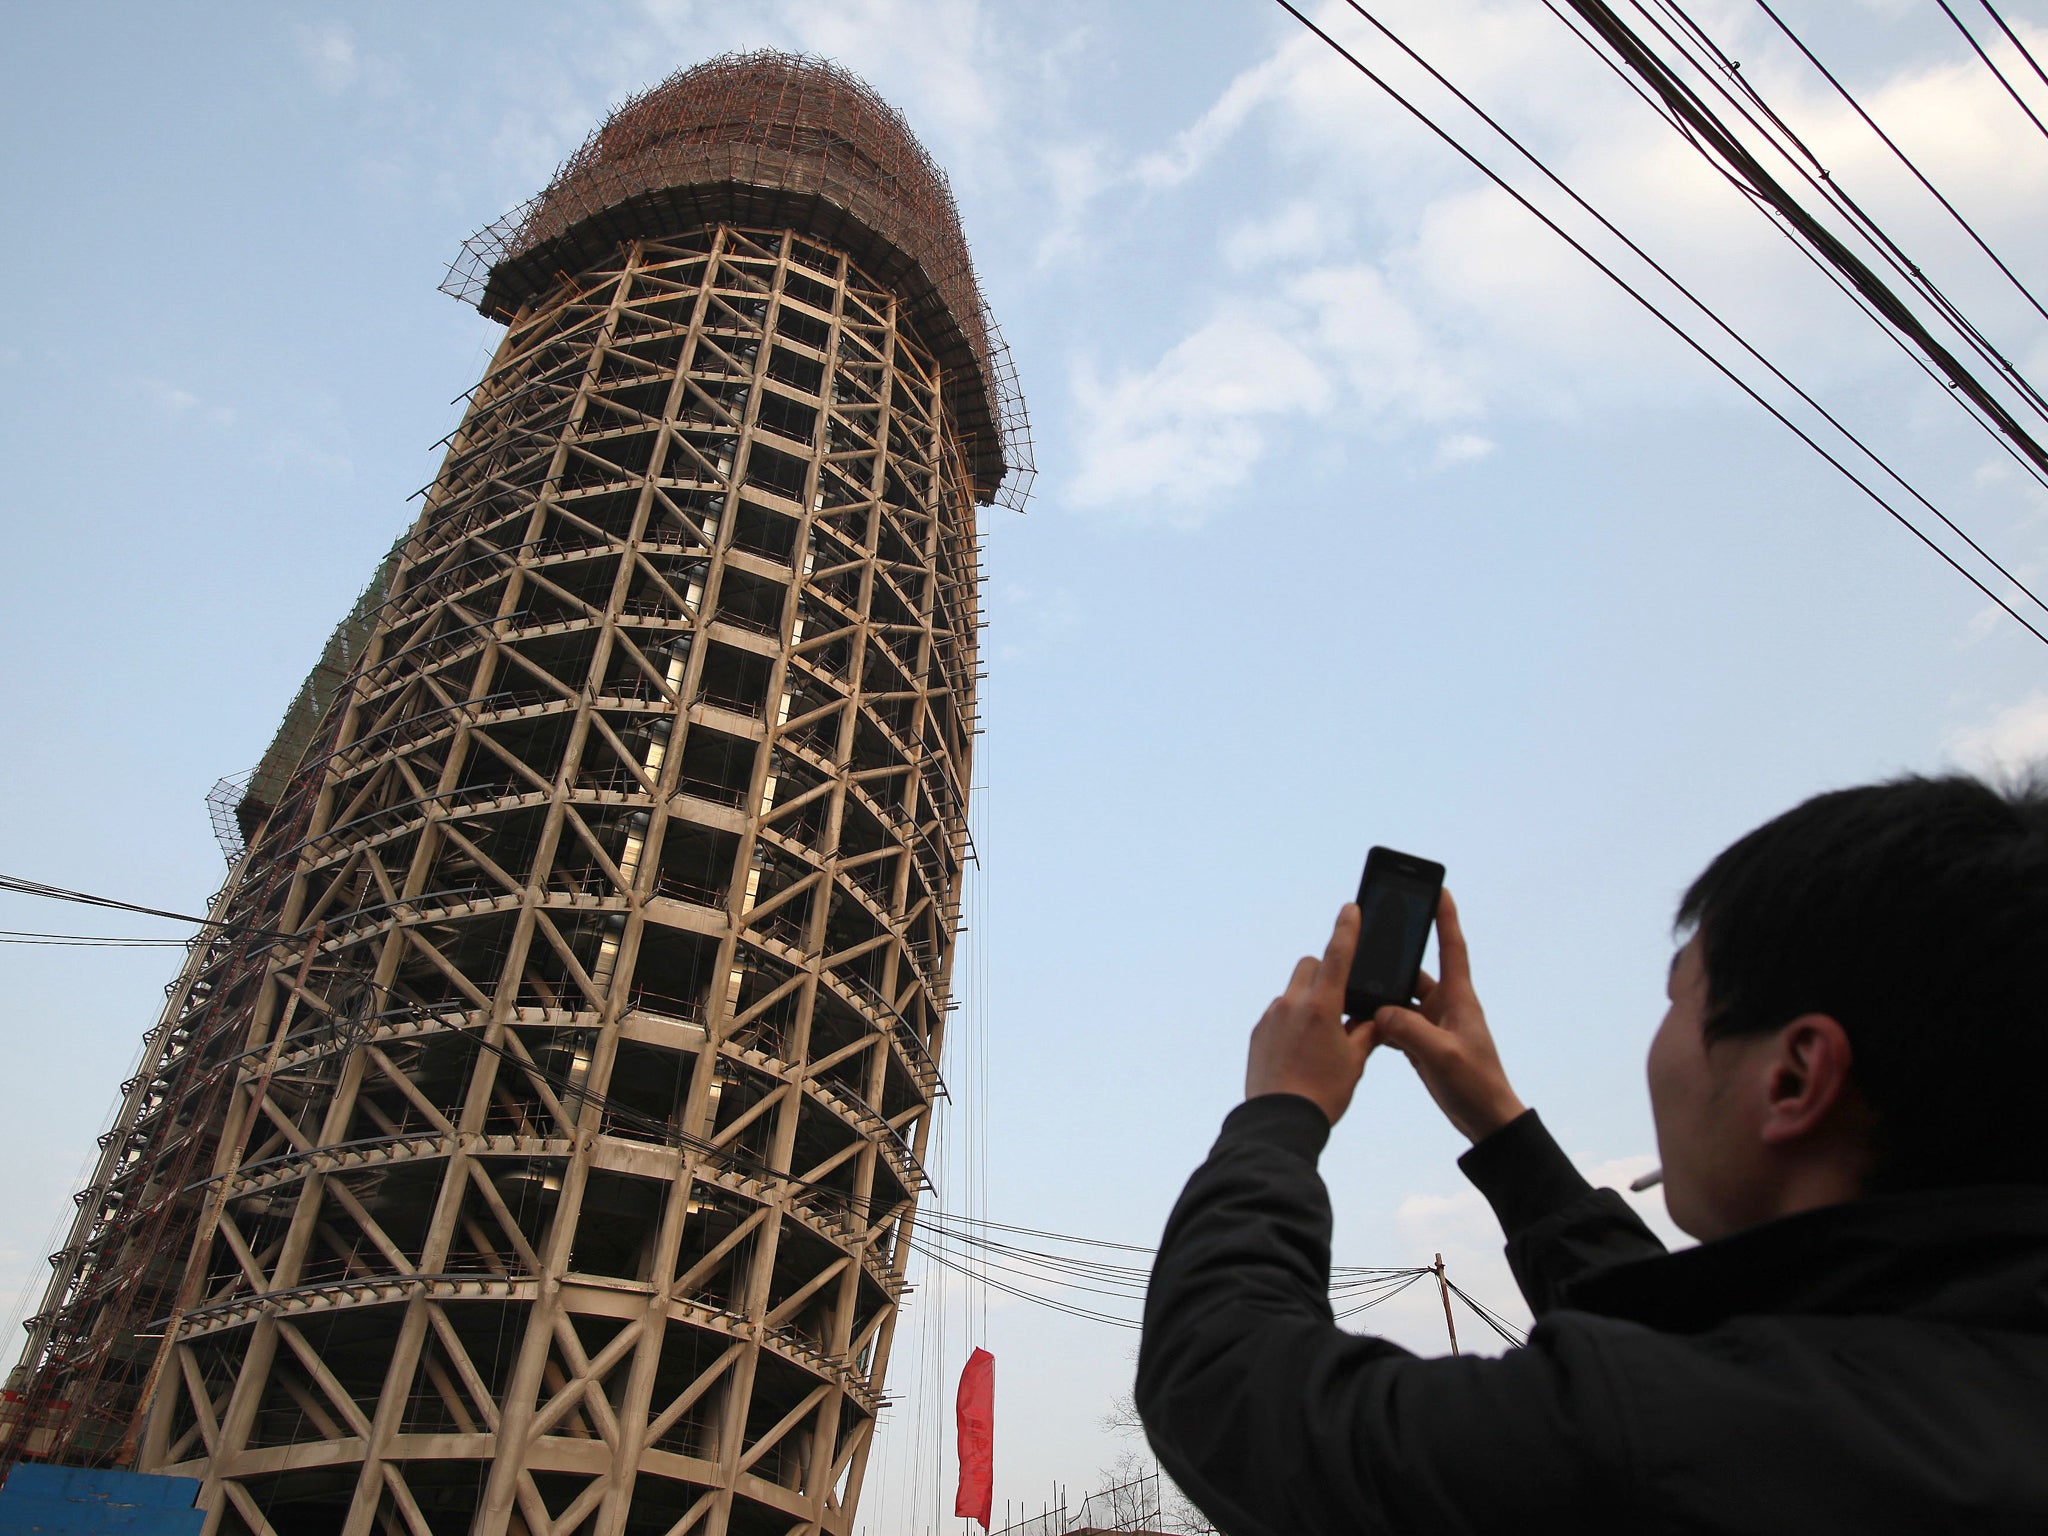 A man in China takes a photograph of the People's Daily's new headquarters